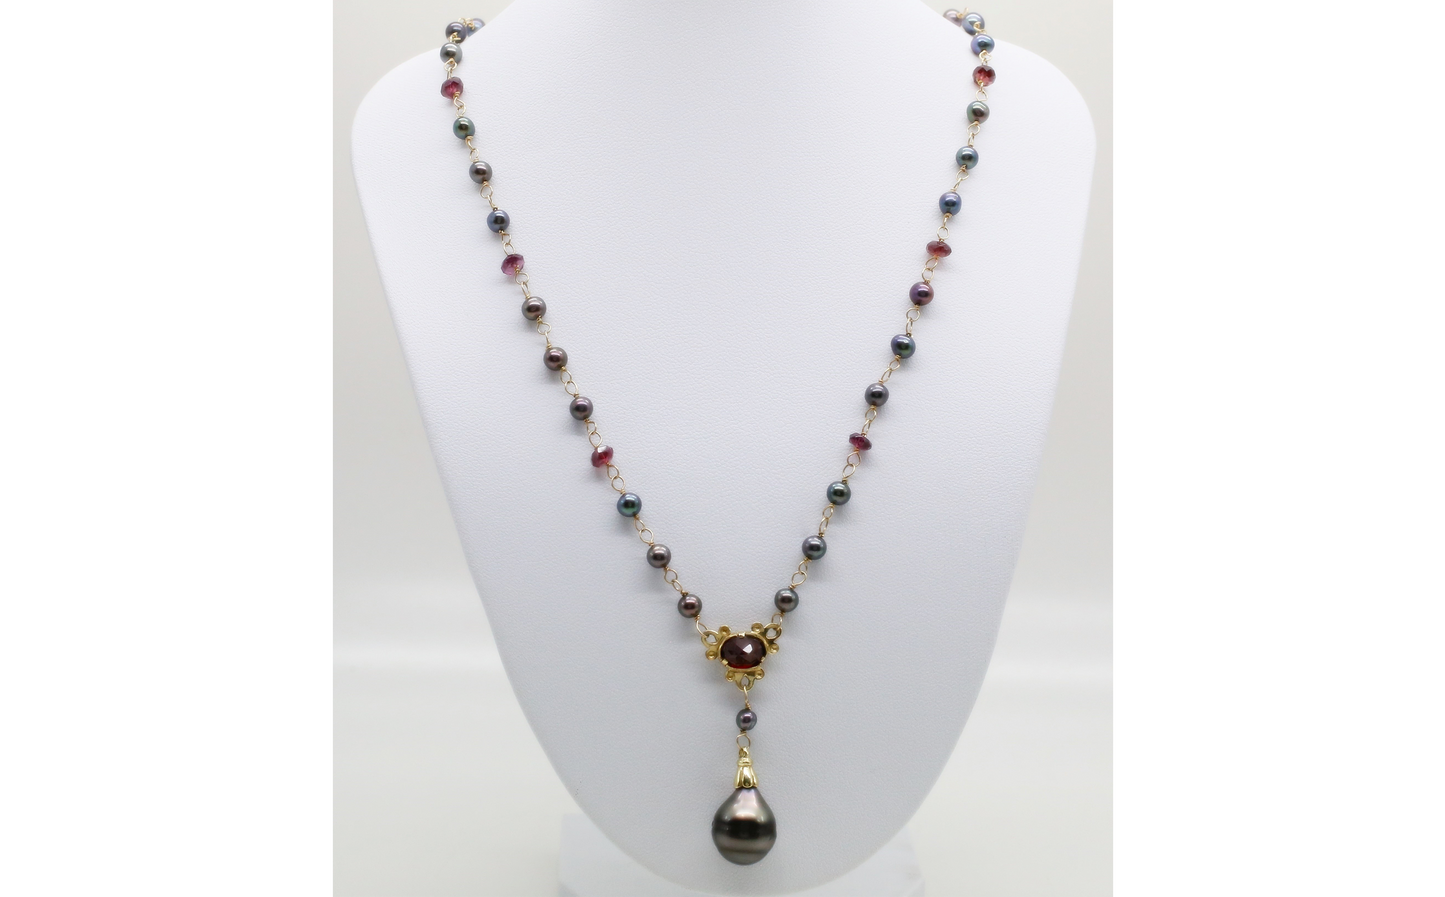 14k Yellow Gold Tahitian Pearl & Garnet Necklace, 18 inches - 12.3g